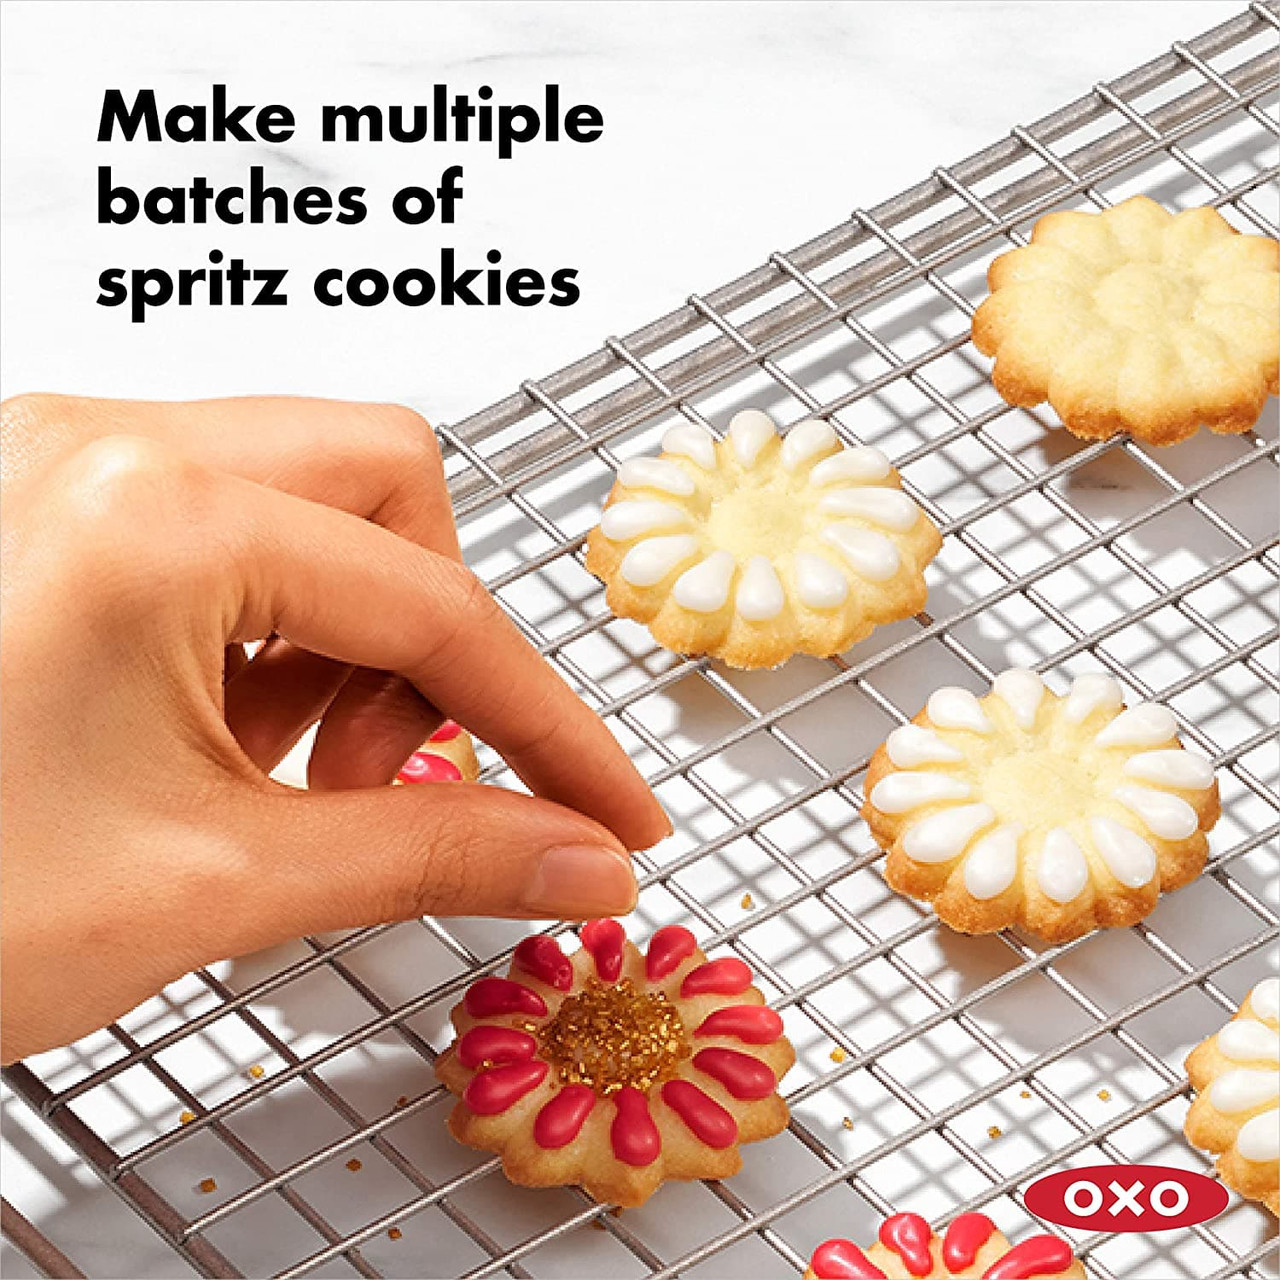 https://cdn11.bigcommerce.com/s-hccytny0od/images/stencil/1280x1280/products/3999/14655/oxo-good-grips-cookie-press-7__84679.1618135011.jpg?c=2?imbypass=on